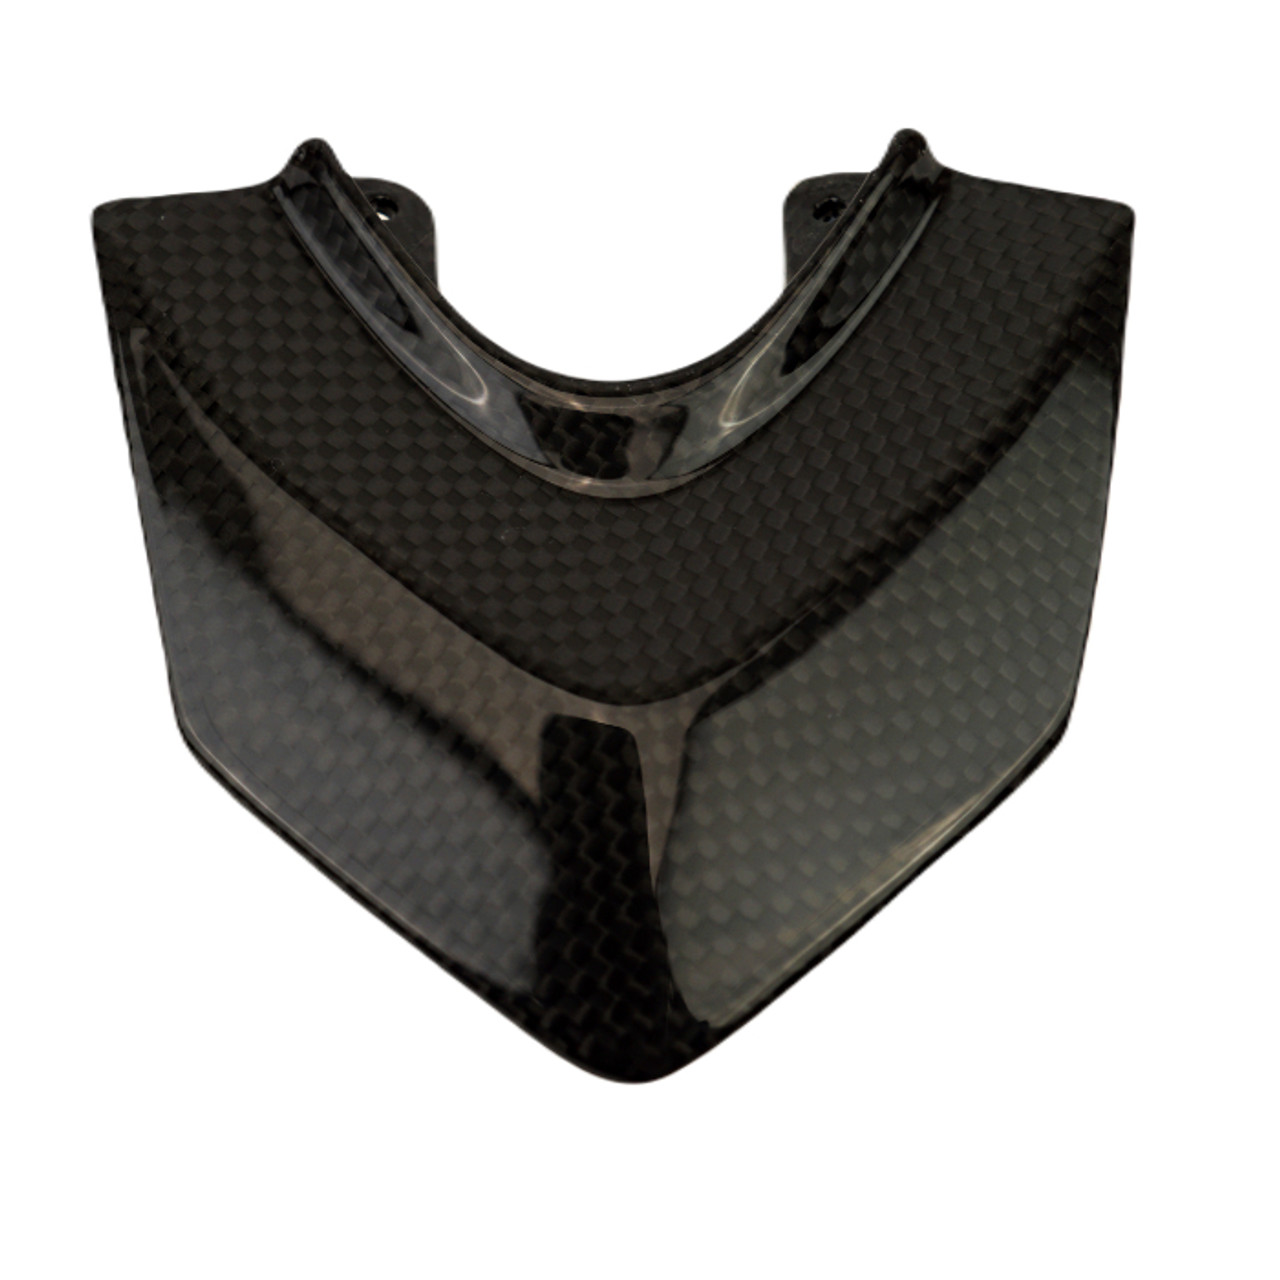 Seat Back in Glossy Twill Weave Carbon Fiber for Honda CBR1000RR-R and SP 2020+

